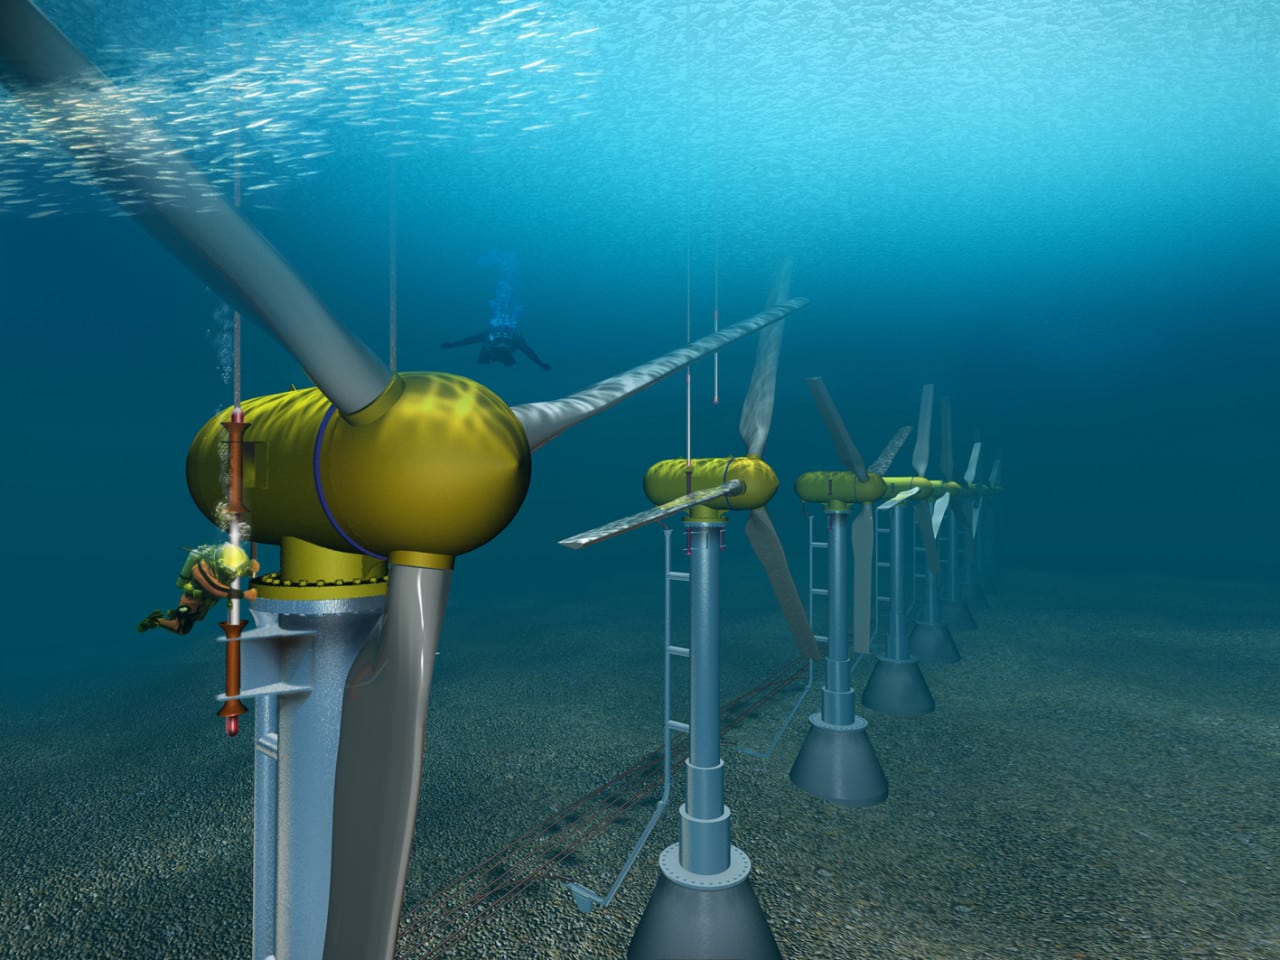 BOEM Finds No Significant Impact for First Proposed U.S. Ocean Current Energy Test Site